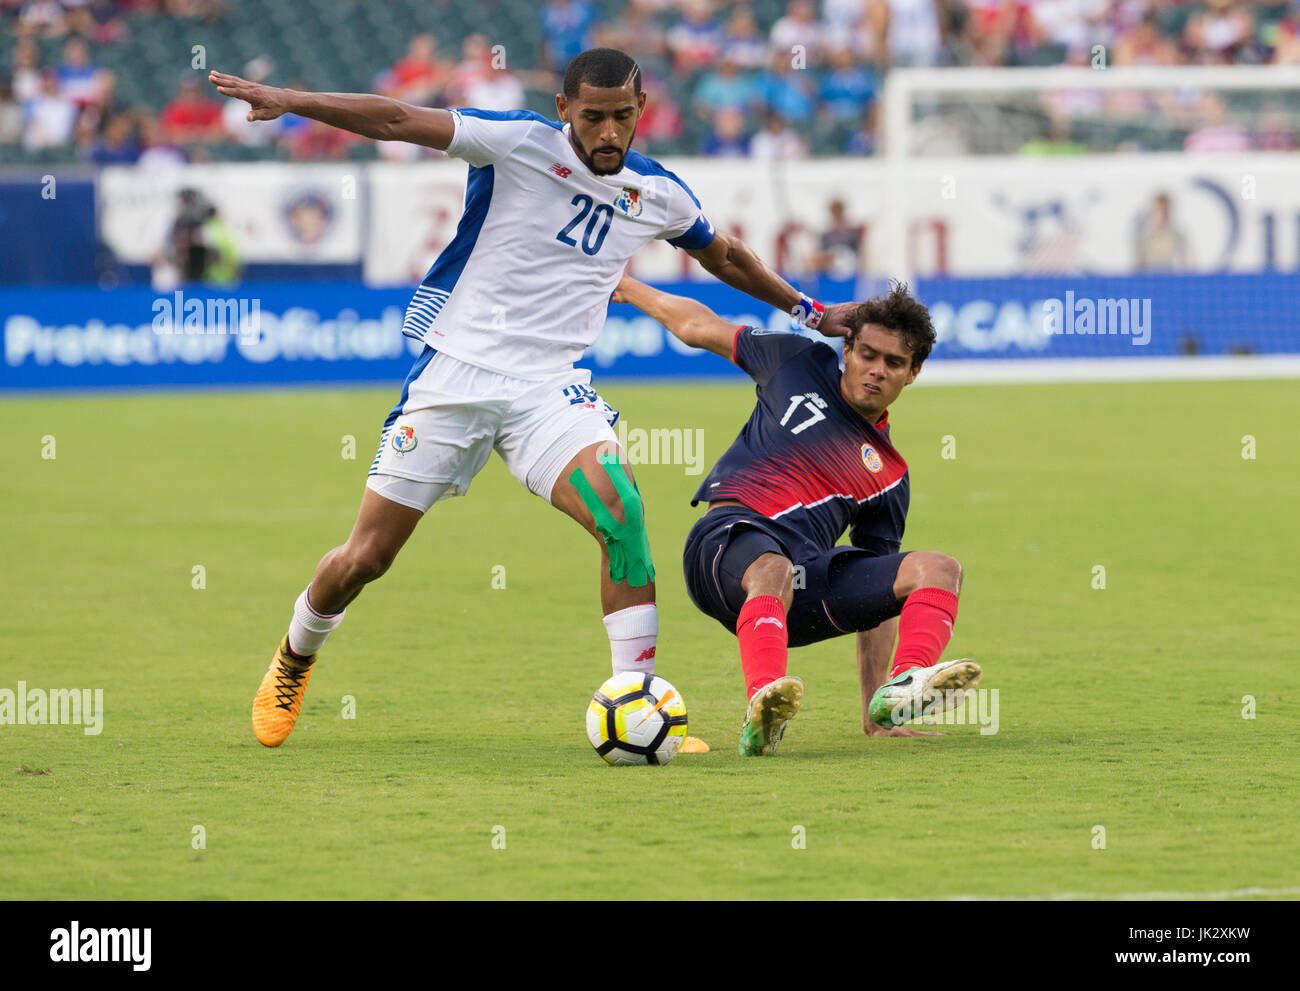 Philadelphia, PA USA - July 19, 2017: Yeltsin Tejeda (17) of Costa Rica & Anibal Godoy (20) of Panama fight for ball during 2017 Gold Cup quaterfinal game Costa Rica won 1 - 0 Stock Photo